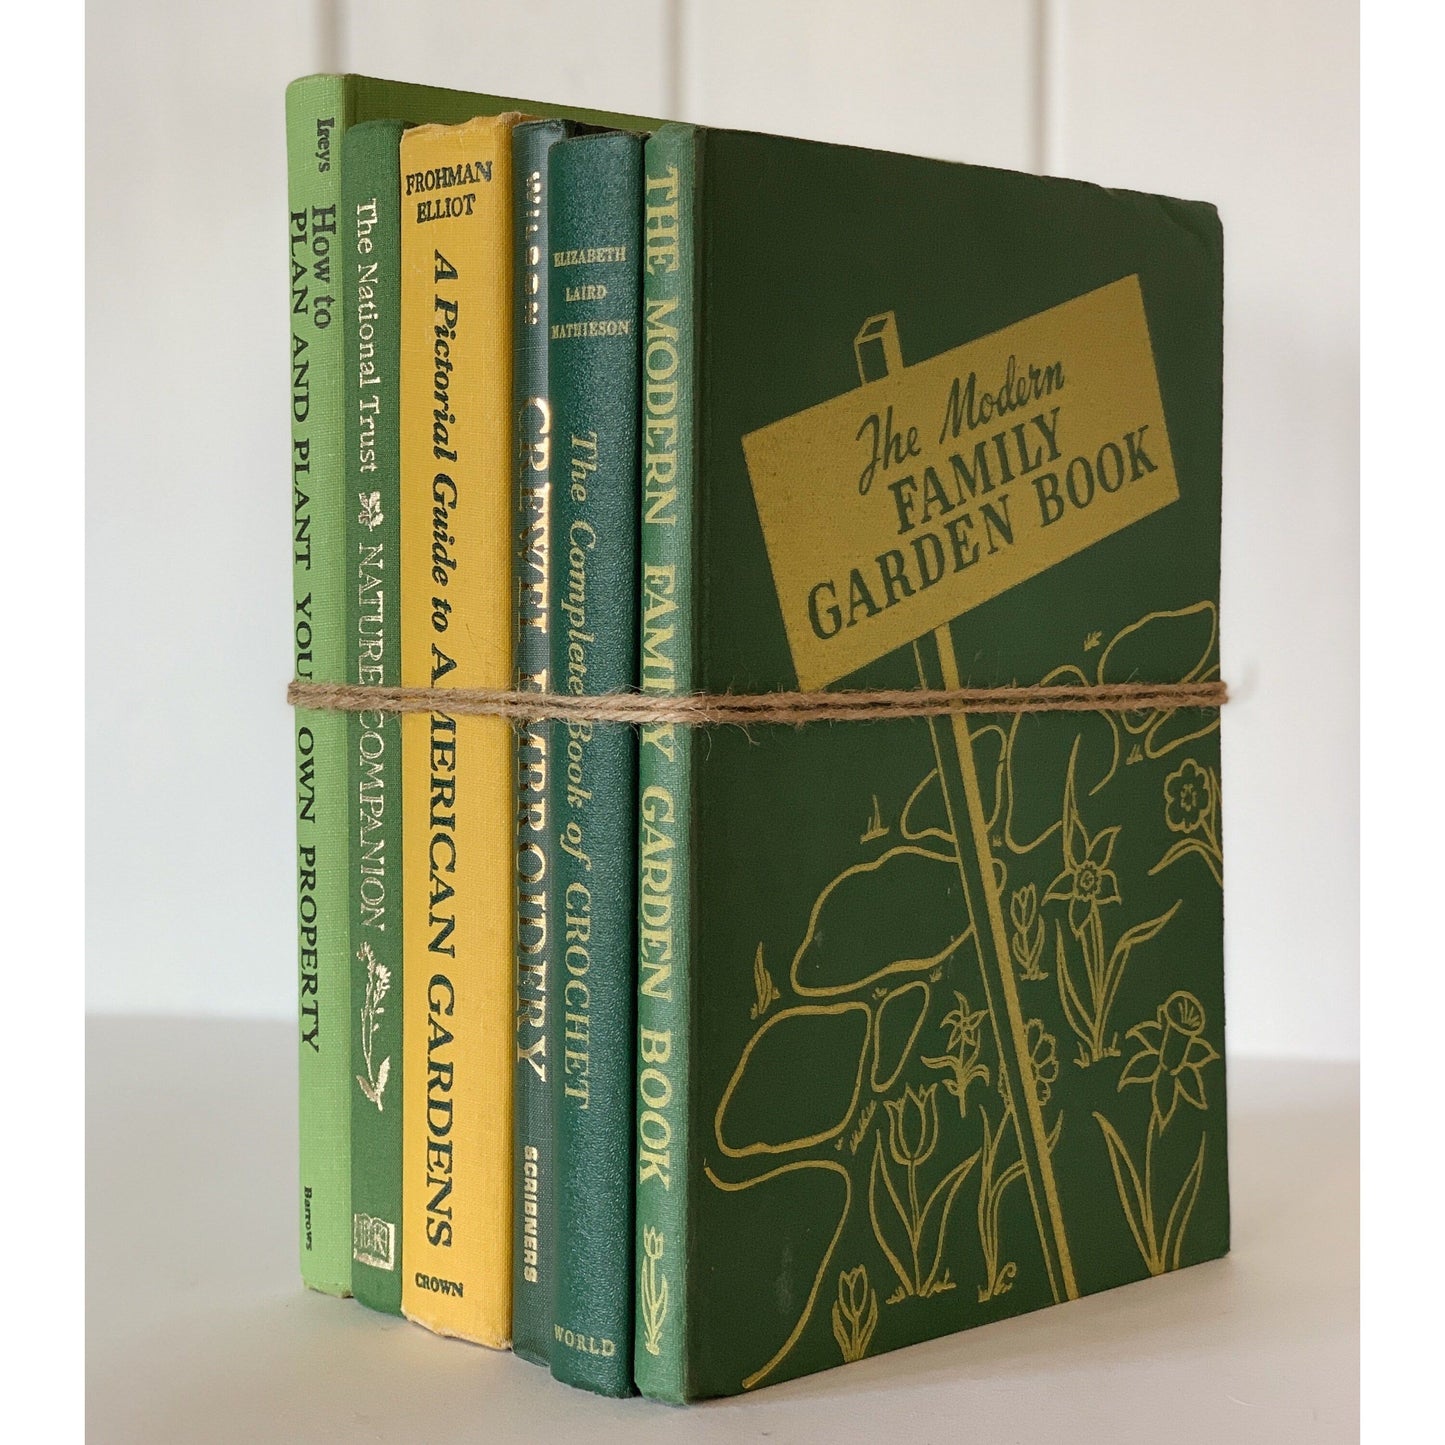 Vintage Gardening and Crafting Coffee Table Book Set, Large Books for Bookshelf Decor